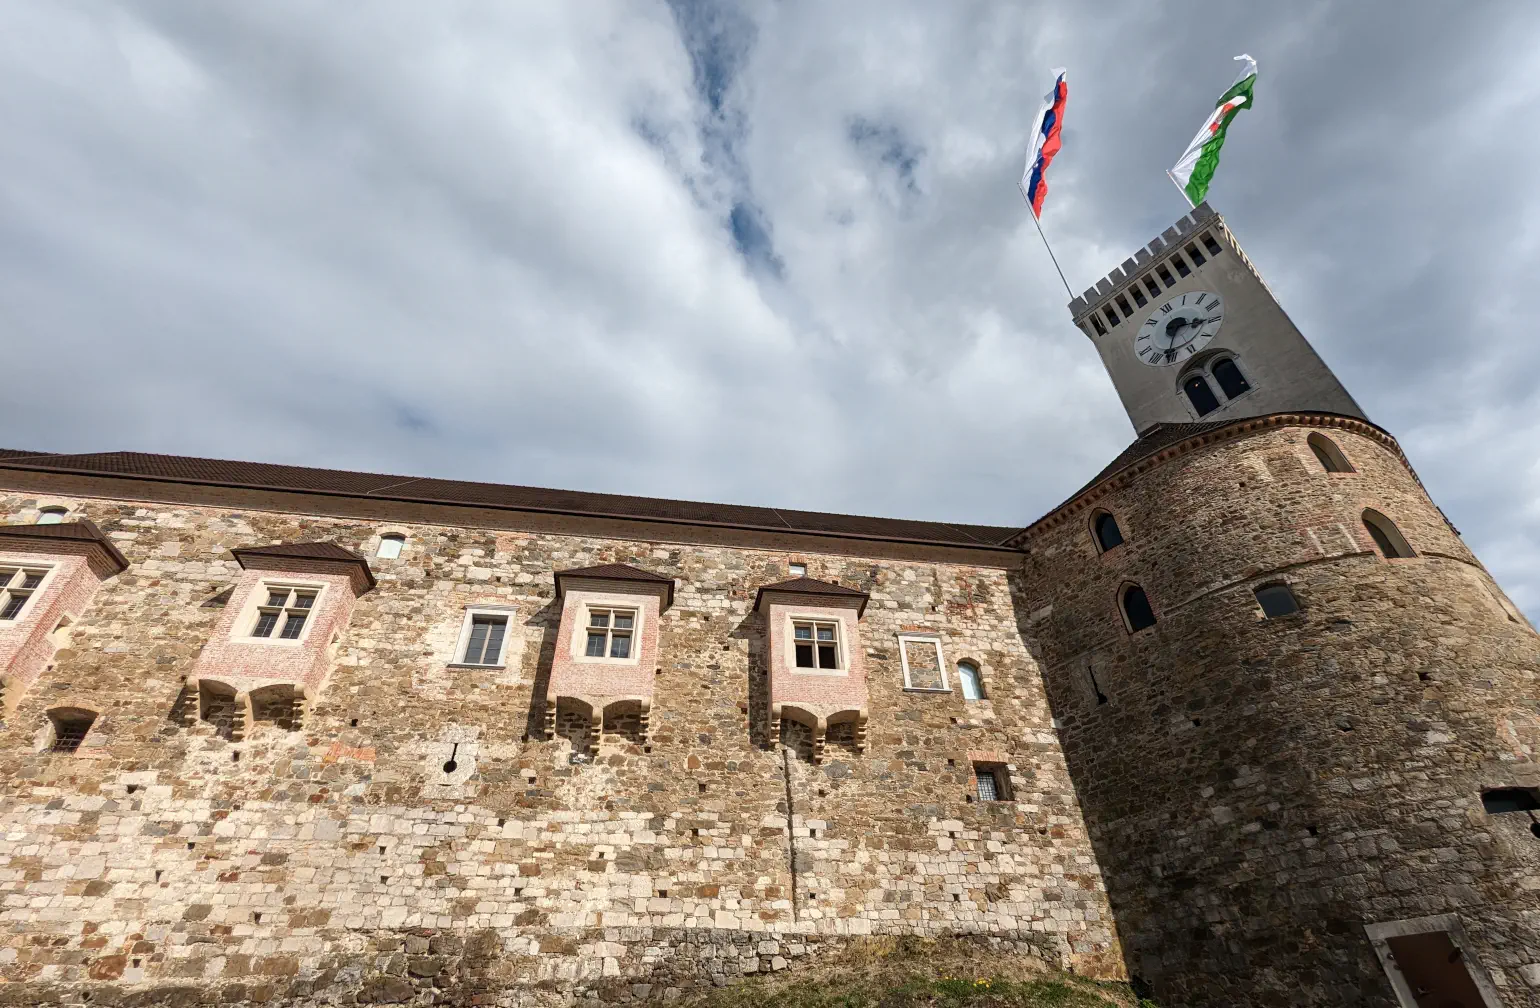 A sunny view of a castle wall and tower with flags flying in the breeze, against a blue sky with white clouds